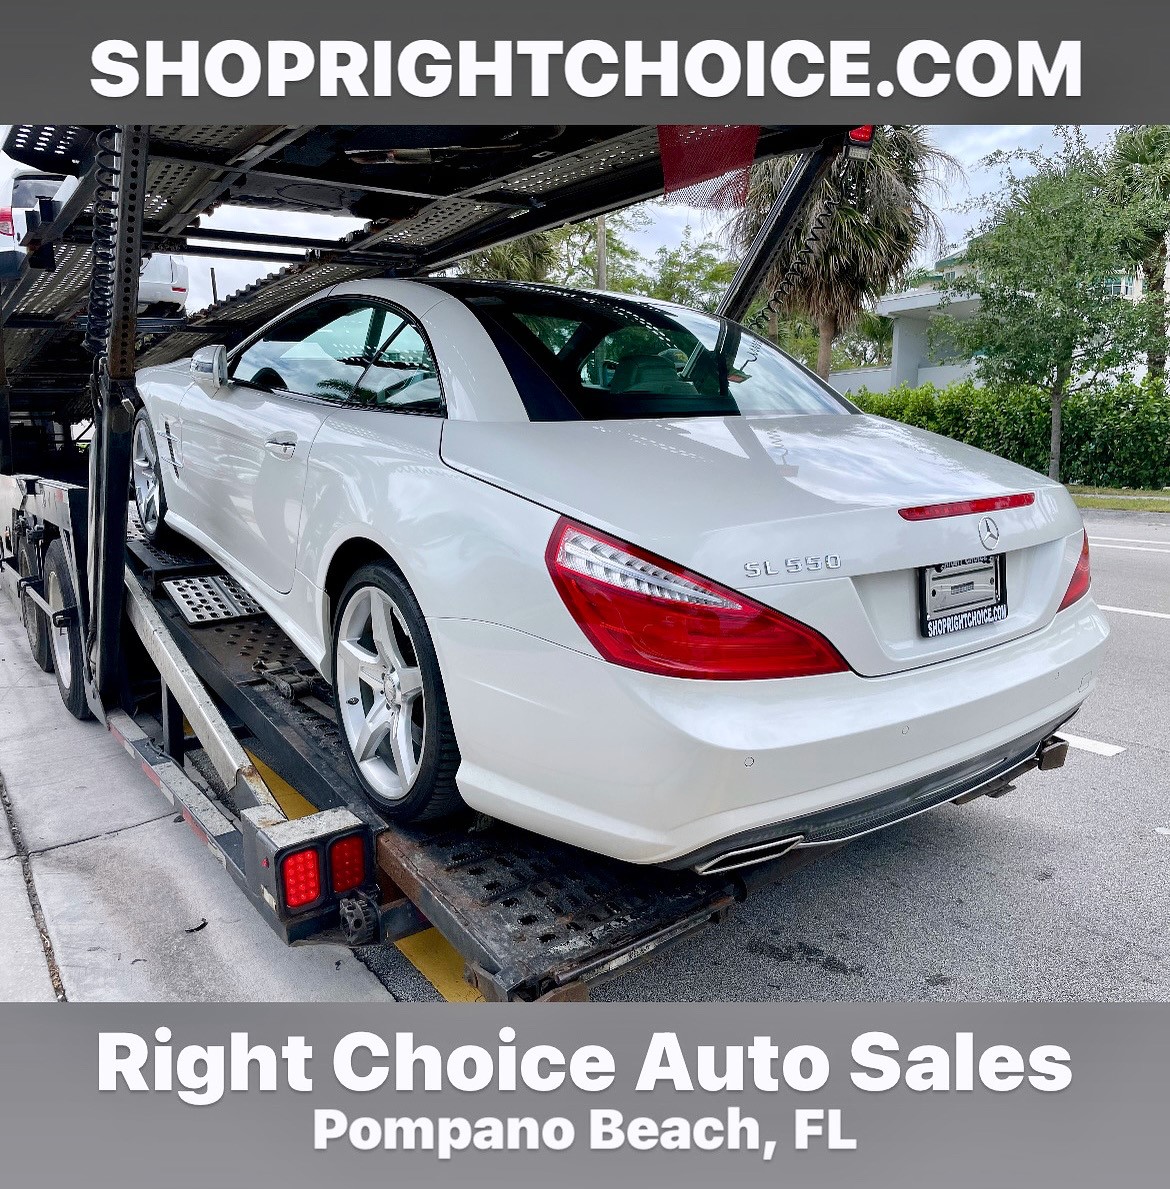 2013 Mercedes-Benz SL550 on its way to its new home in Philadelphia, PA! #RightChoiceAutoSales in Pompano Beach, FL delivers #thebest used luxury cars to your home!  #cardelivery #usedcardealer